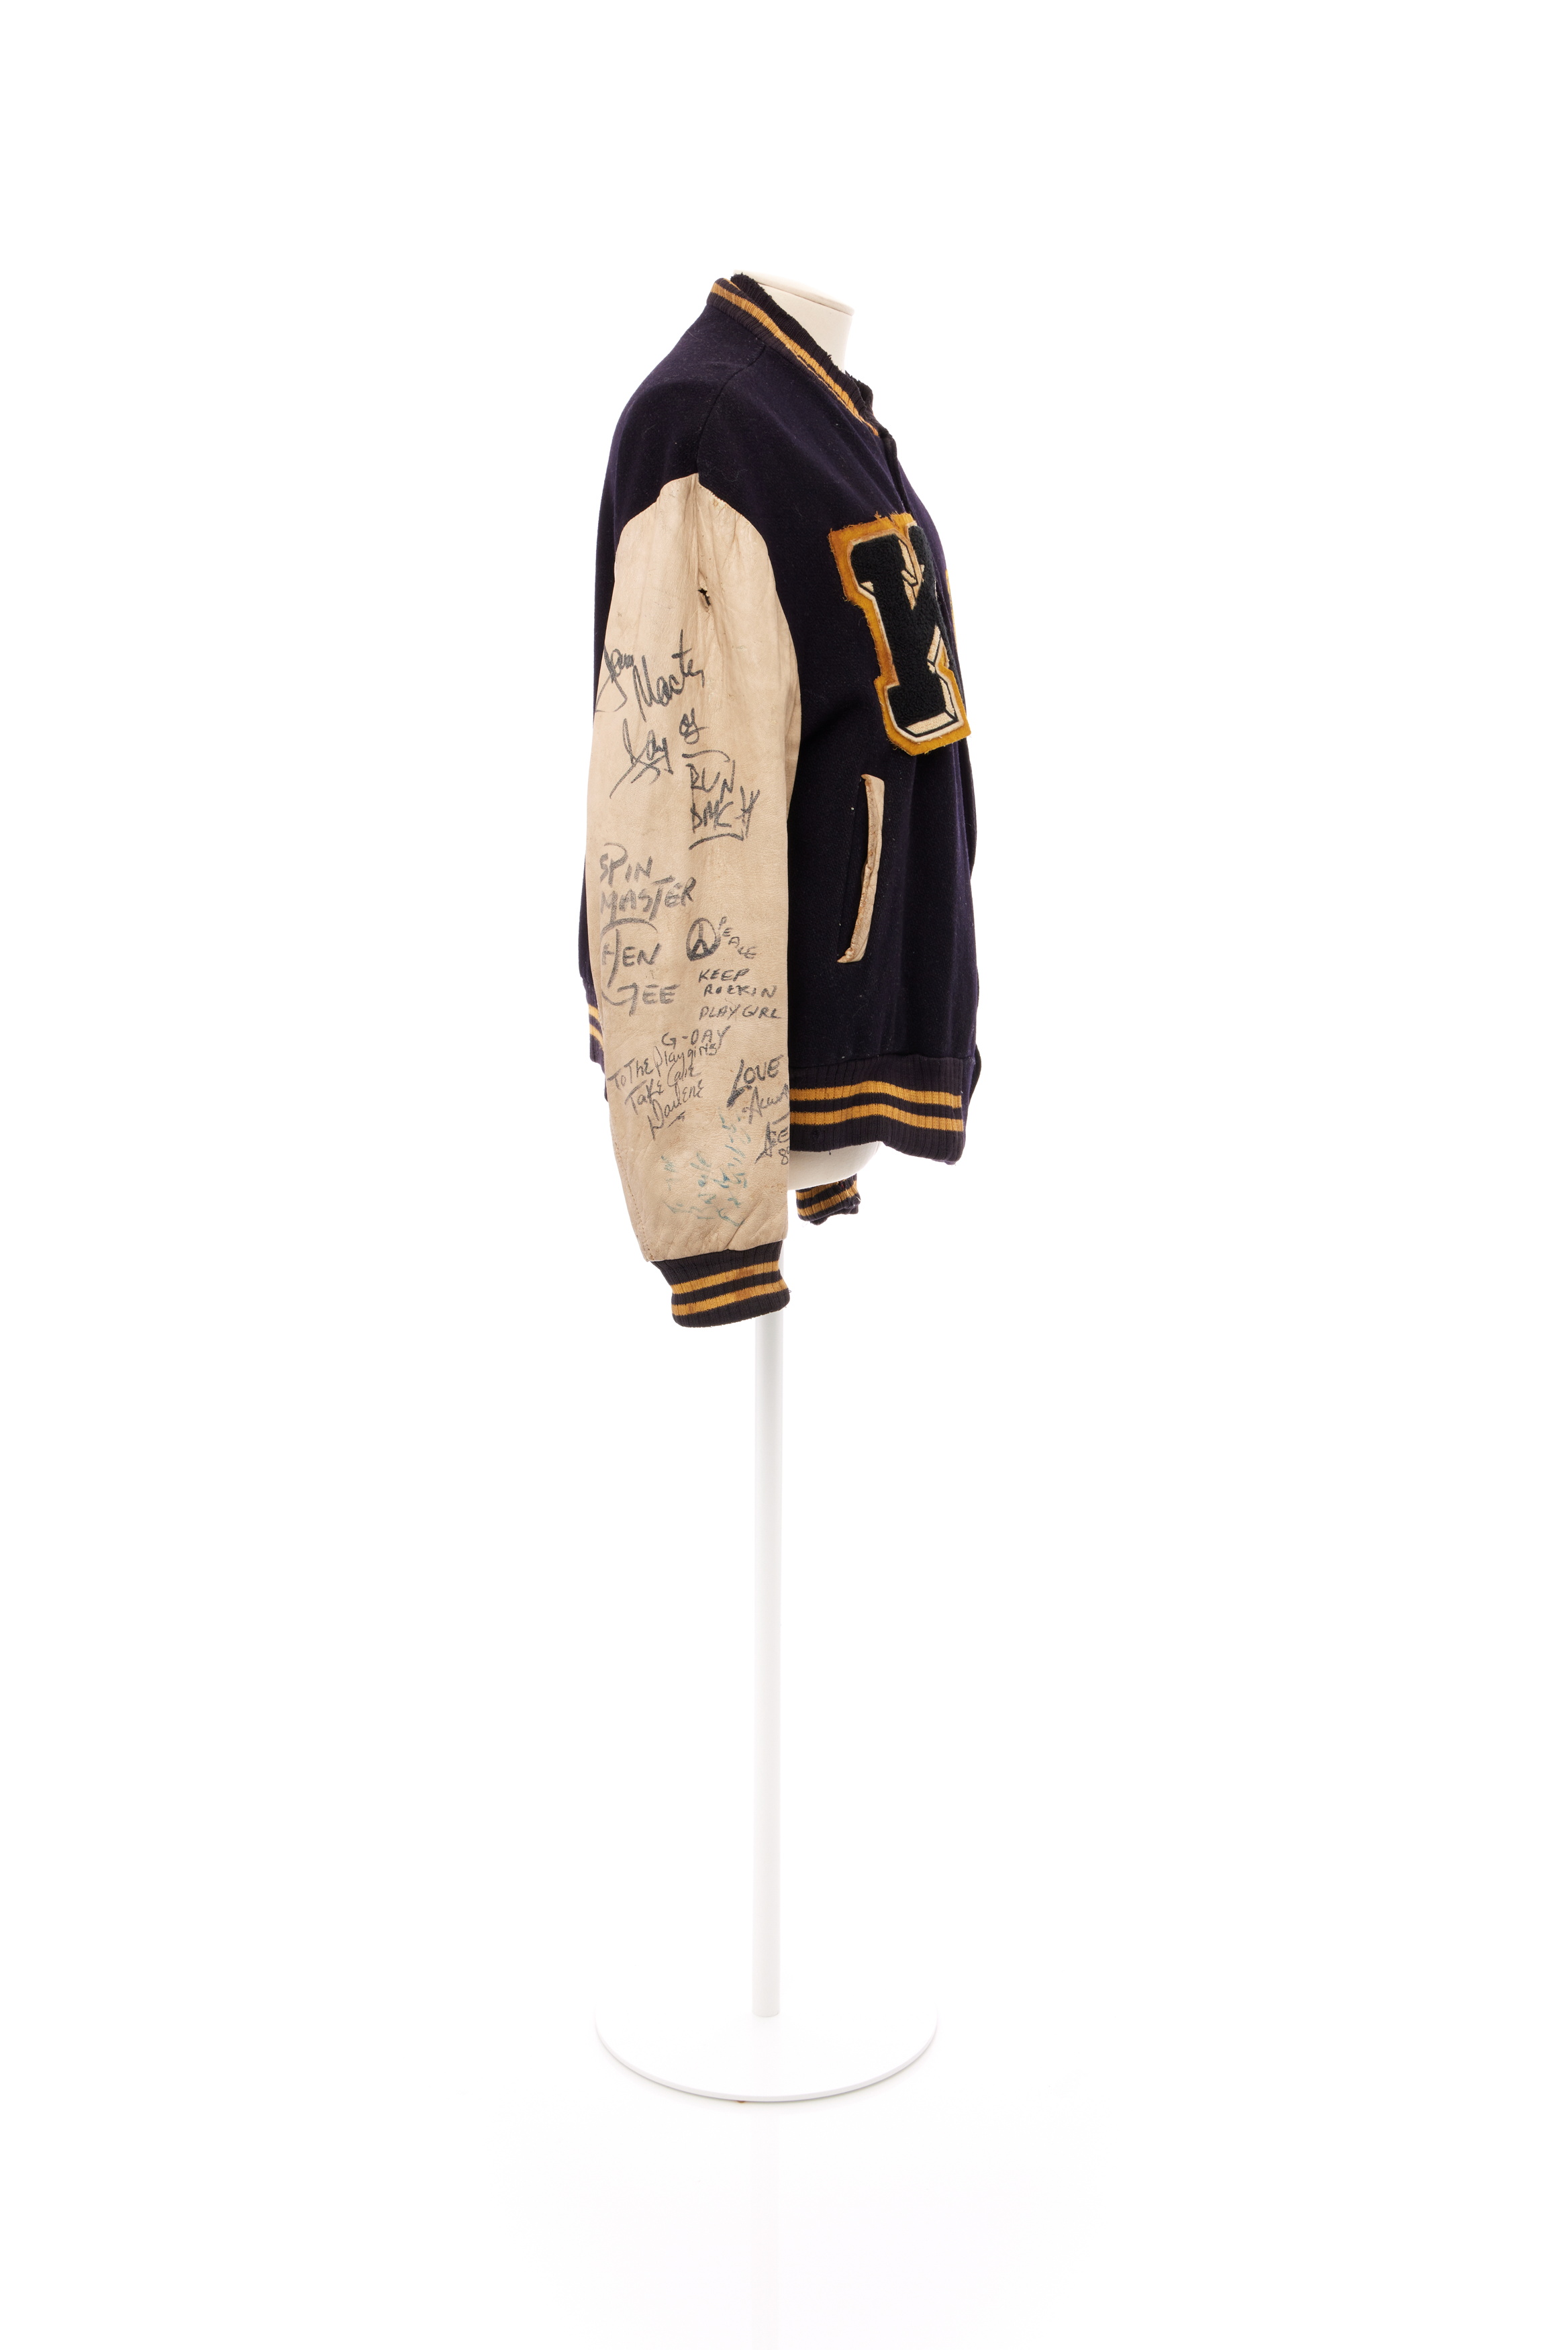 Autographed letterman jacket worn by Spice